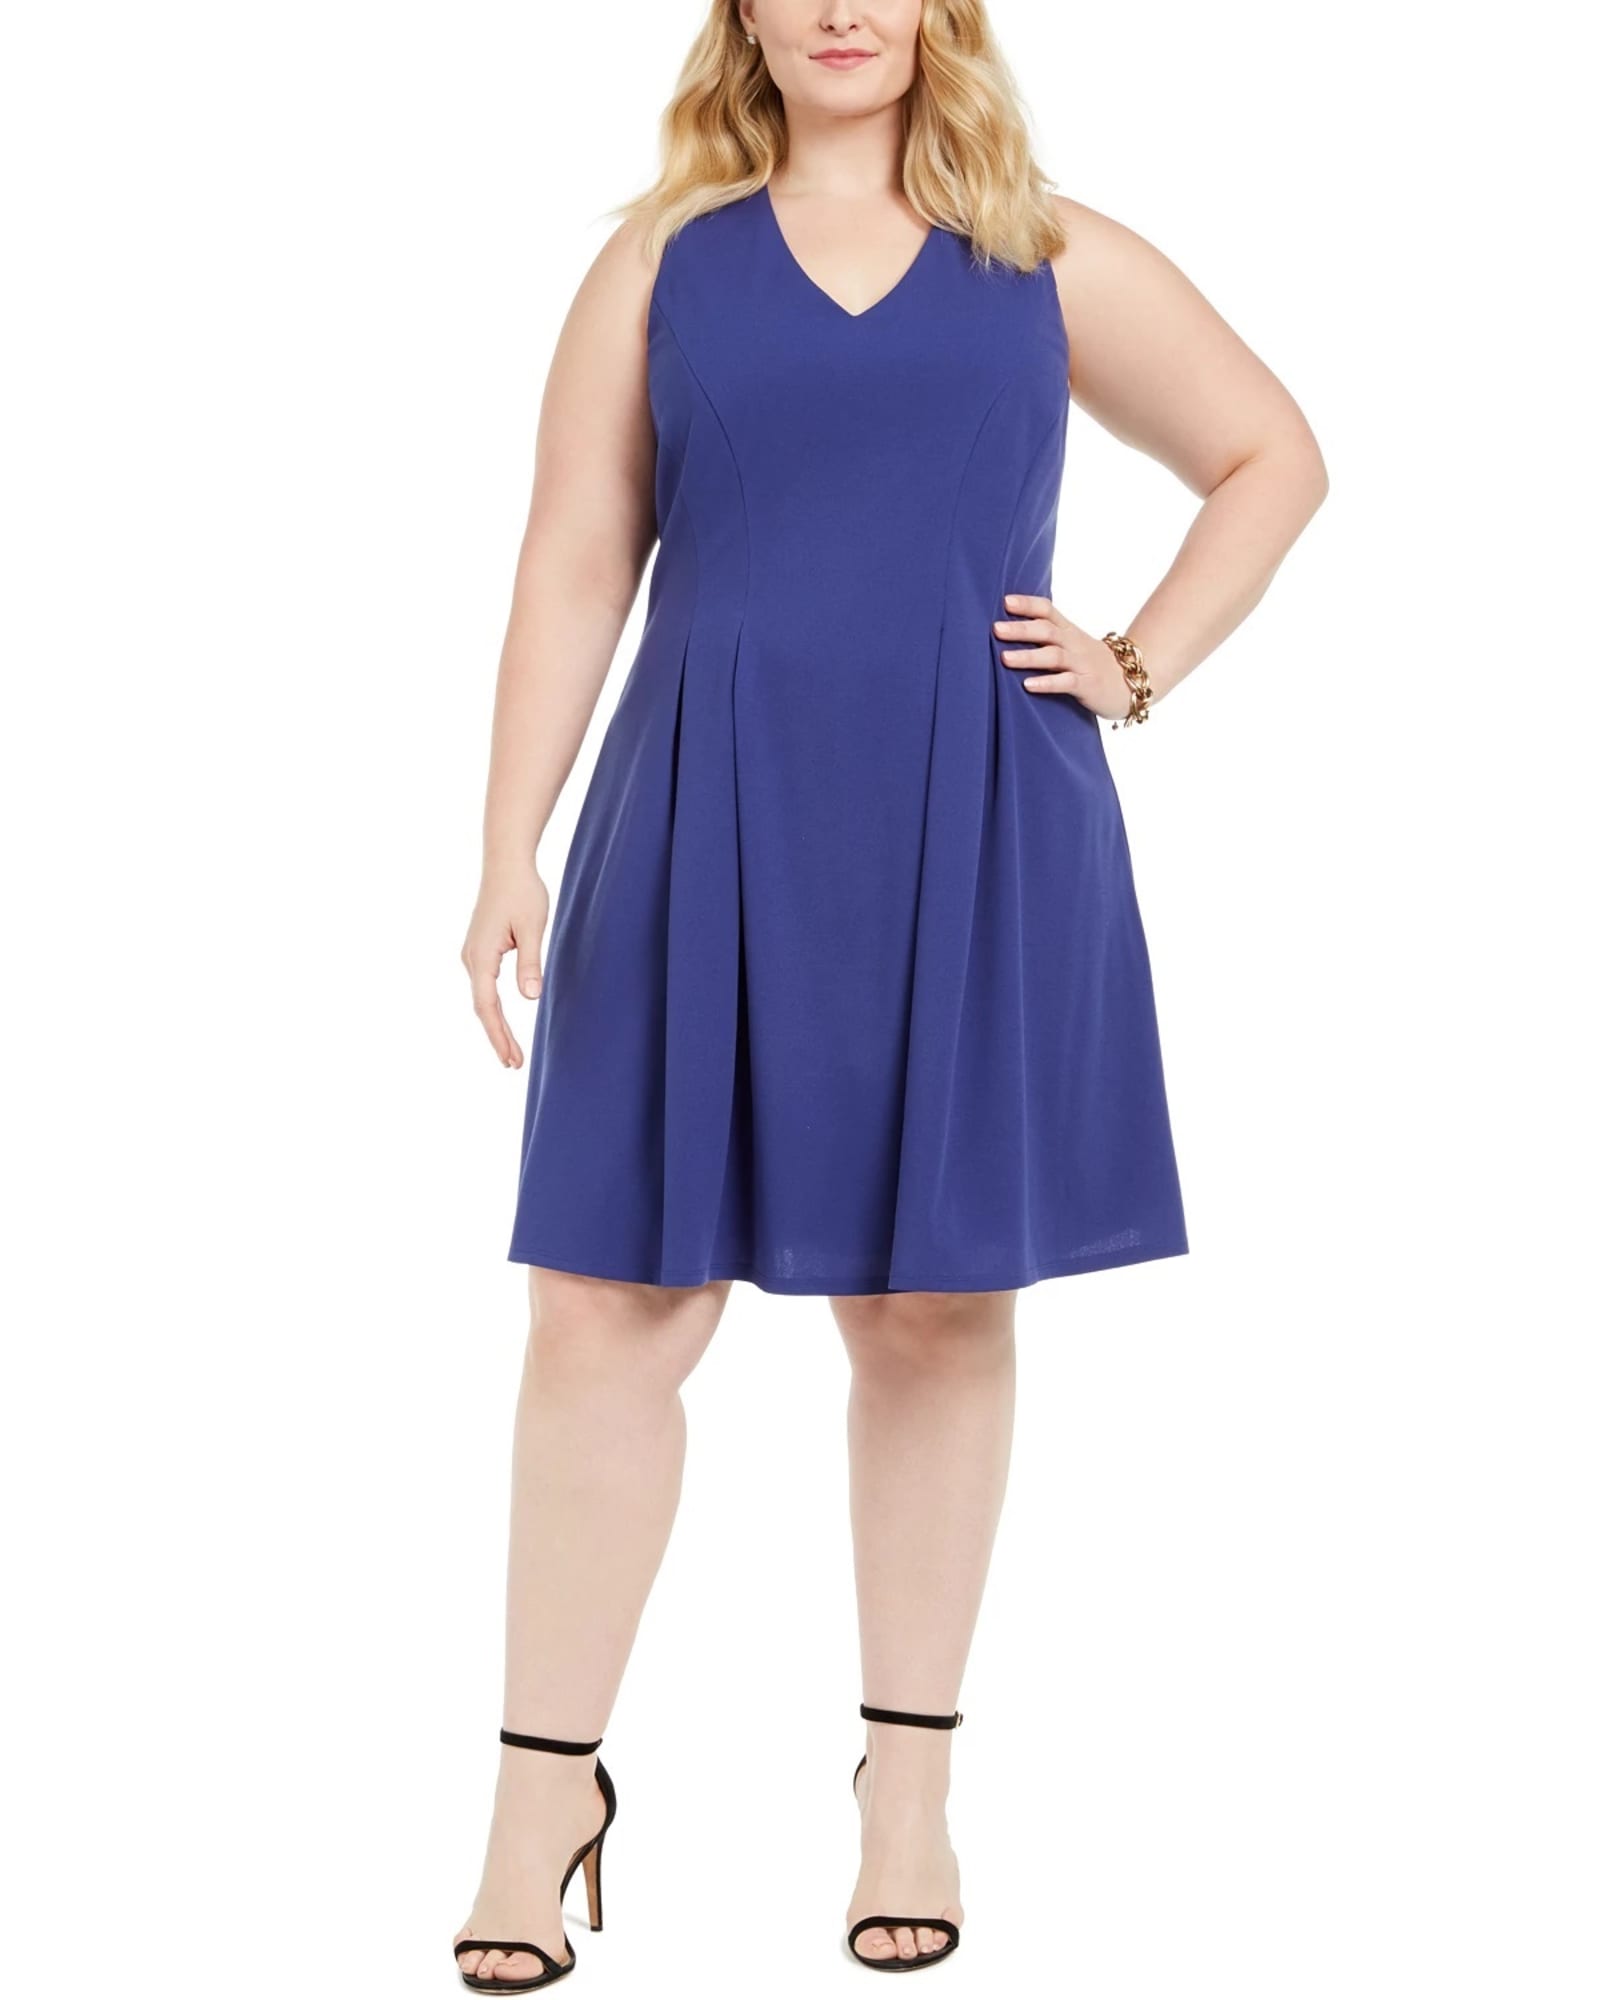 Page 18 for Cheap Plus Size Dresses on Sale